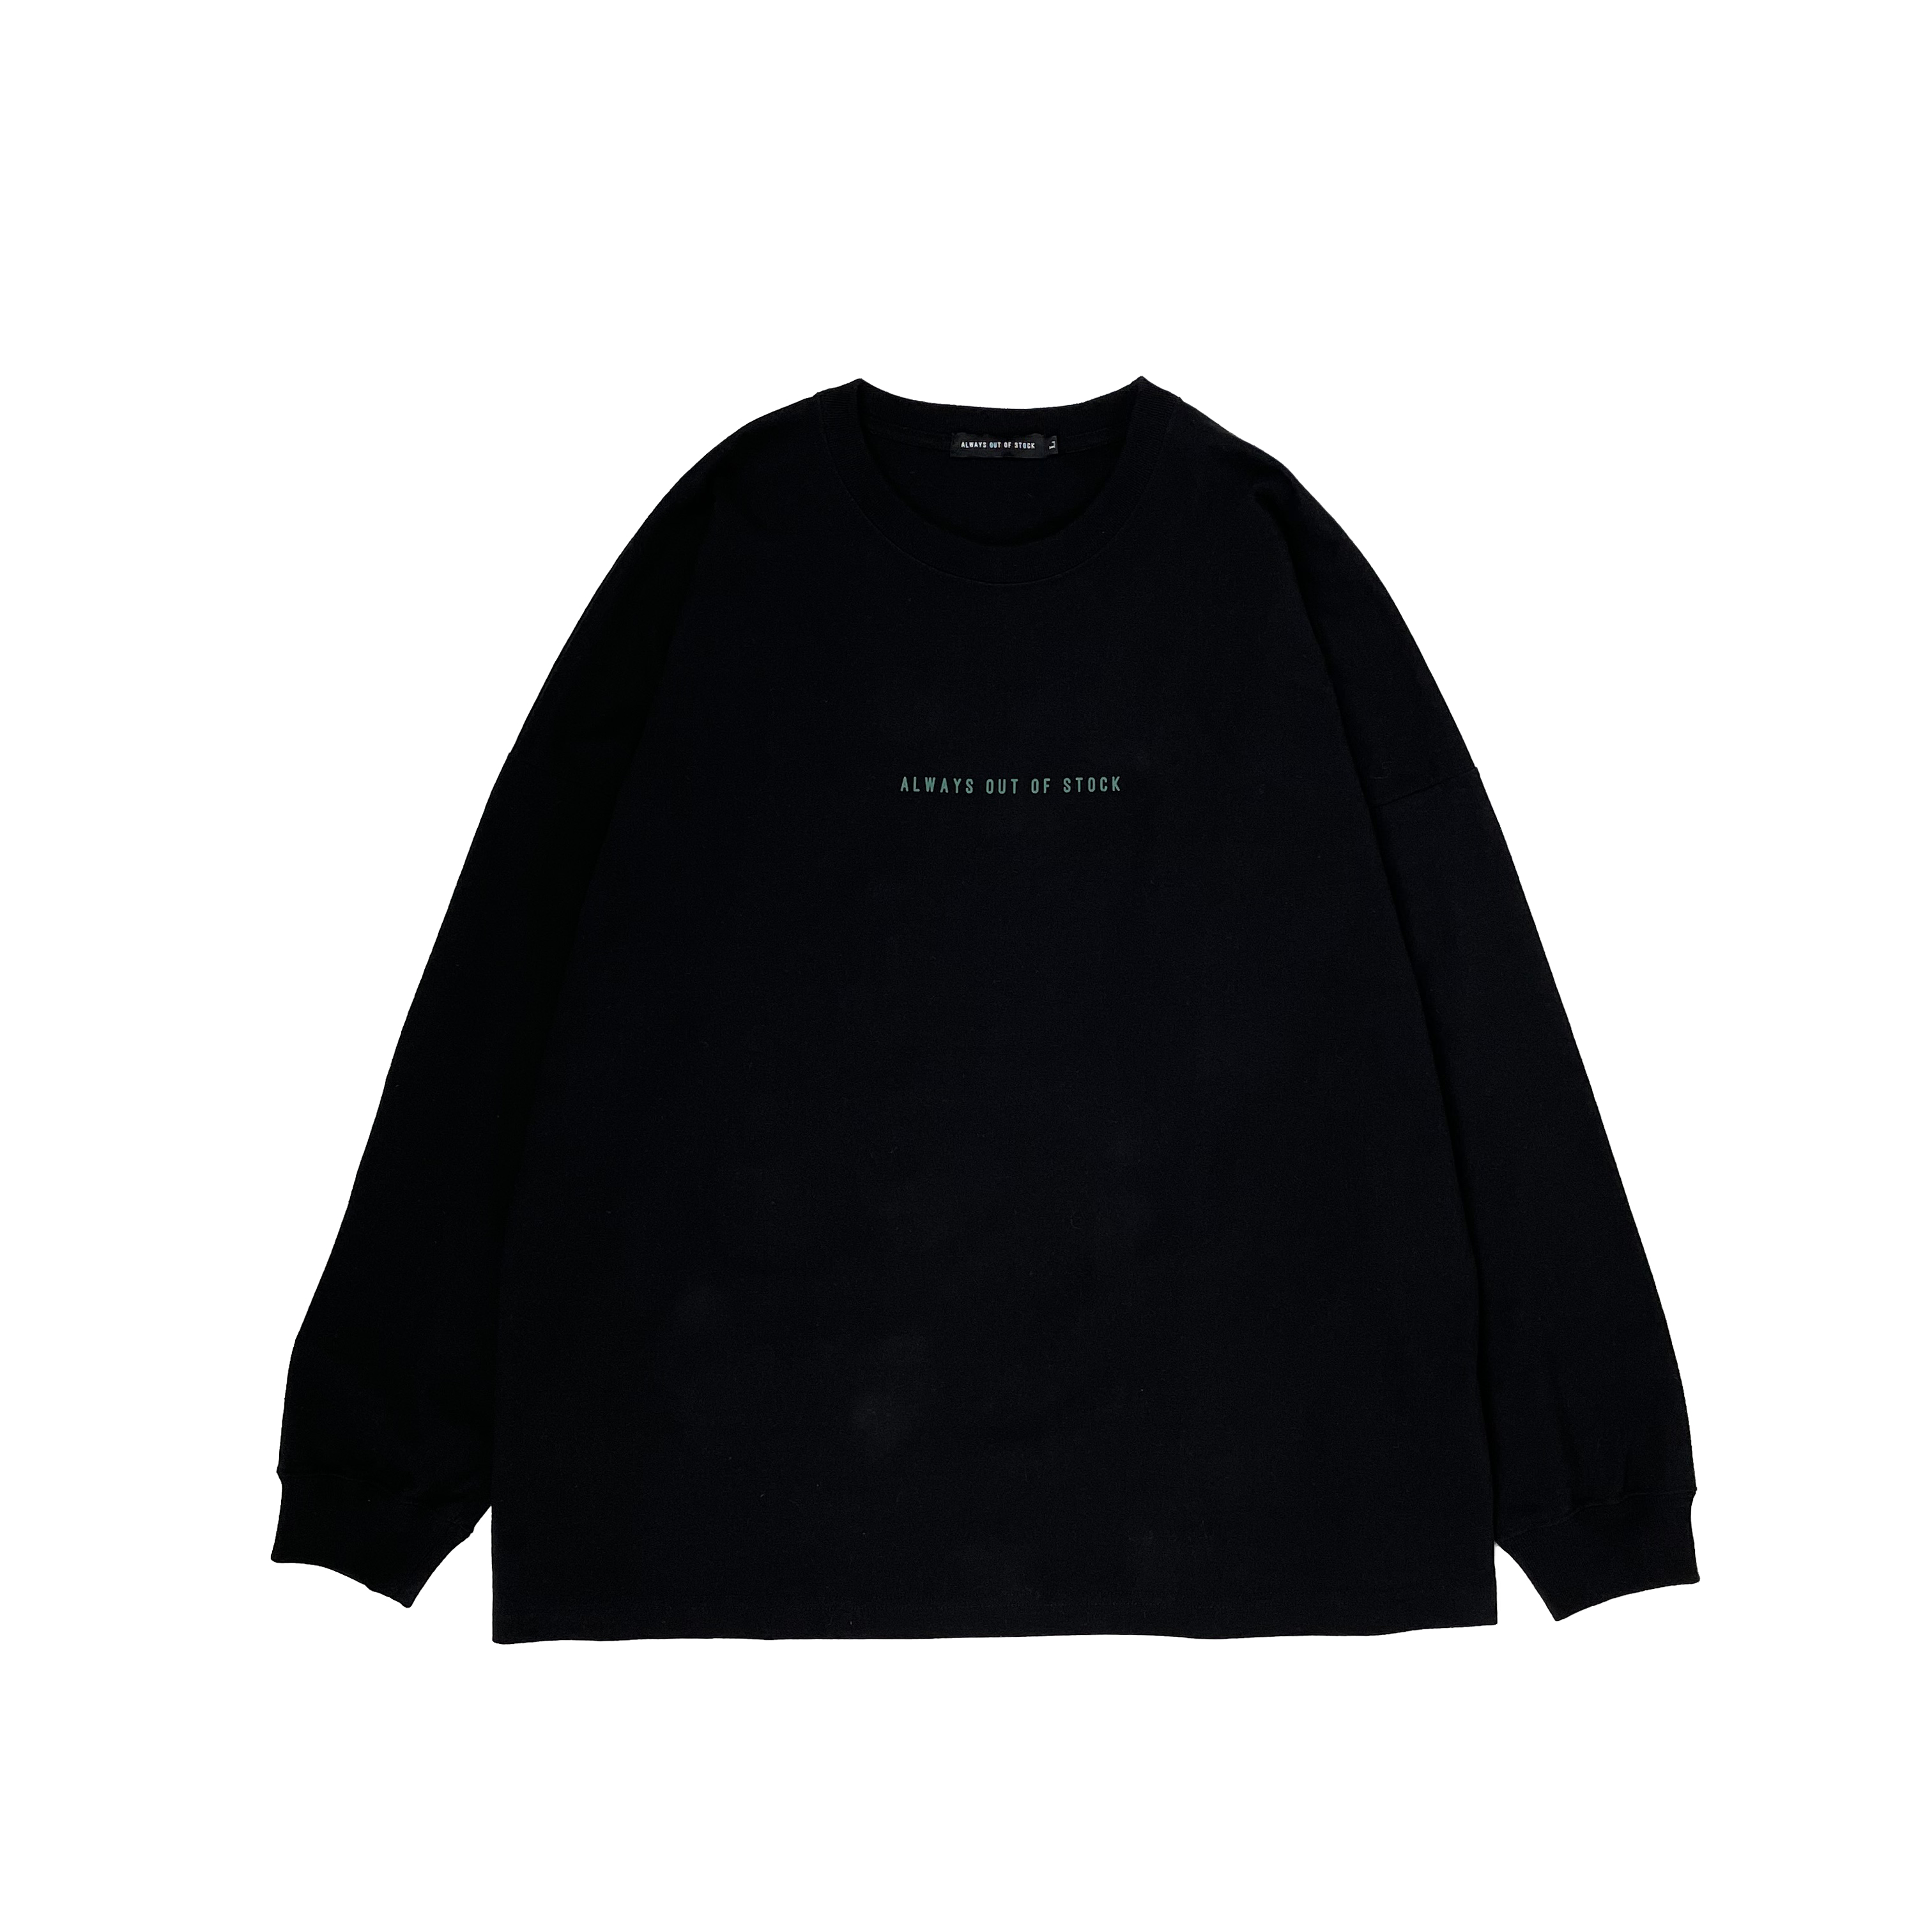 ALWAYS OUT OF STOCK】 APPRECIATE L/S TEE – Good Wood